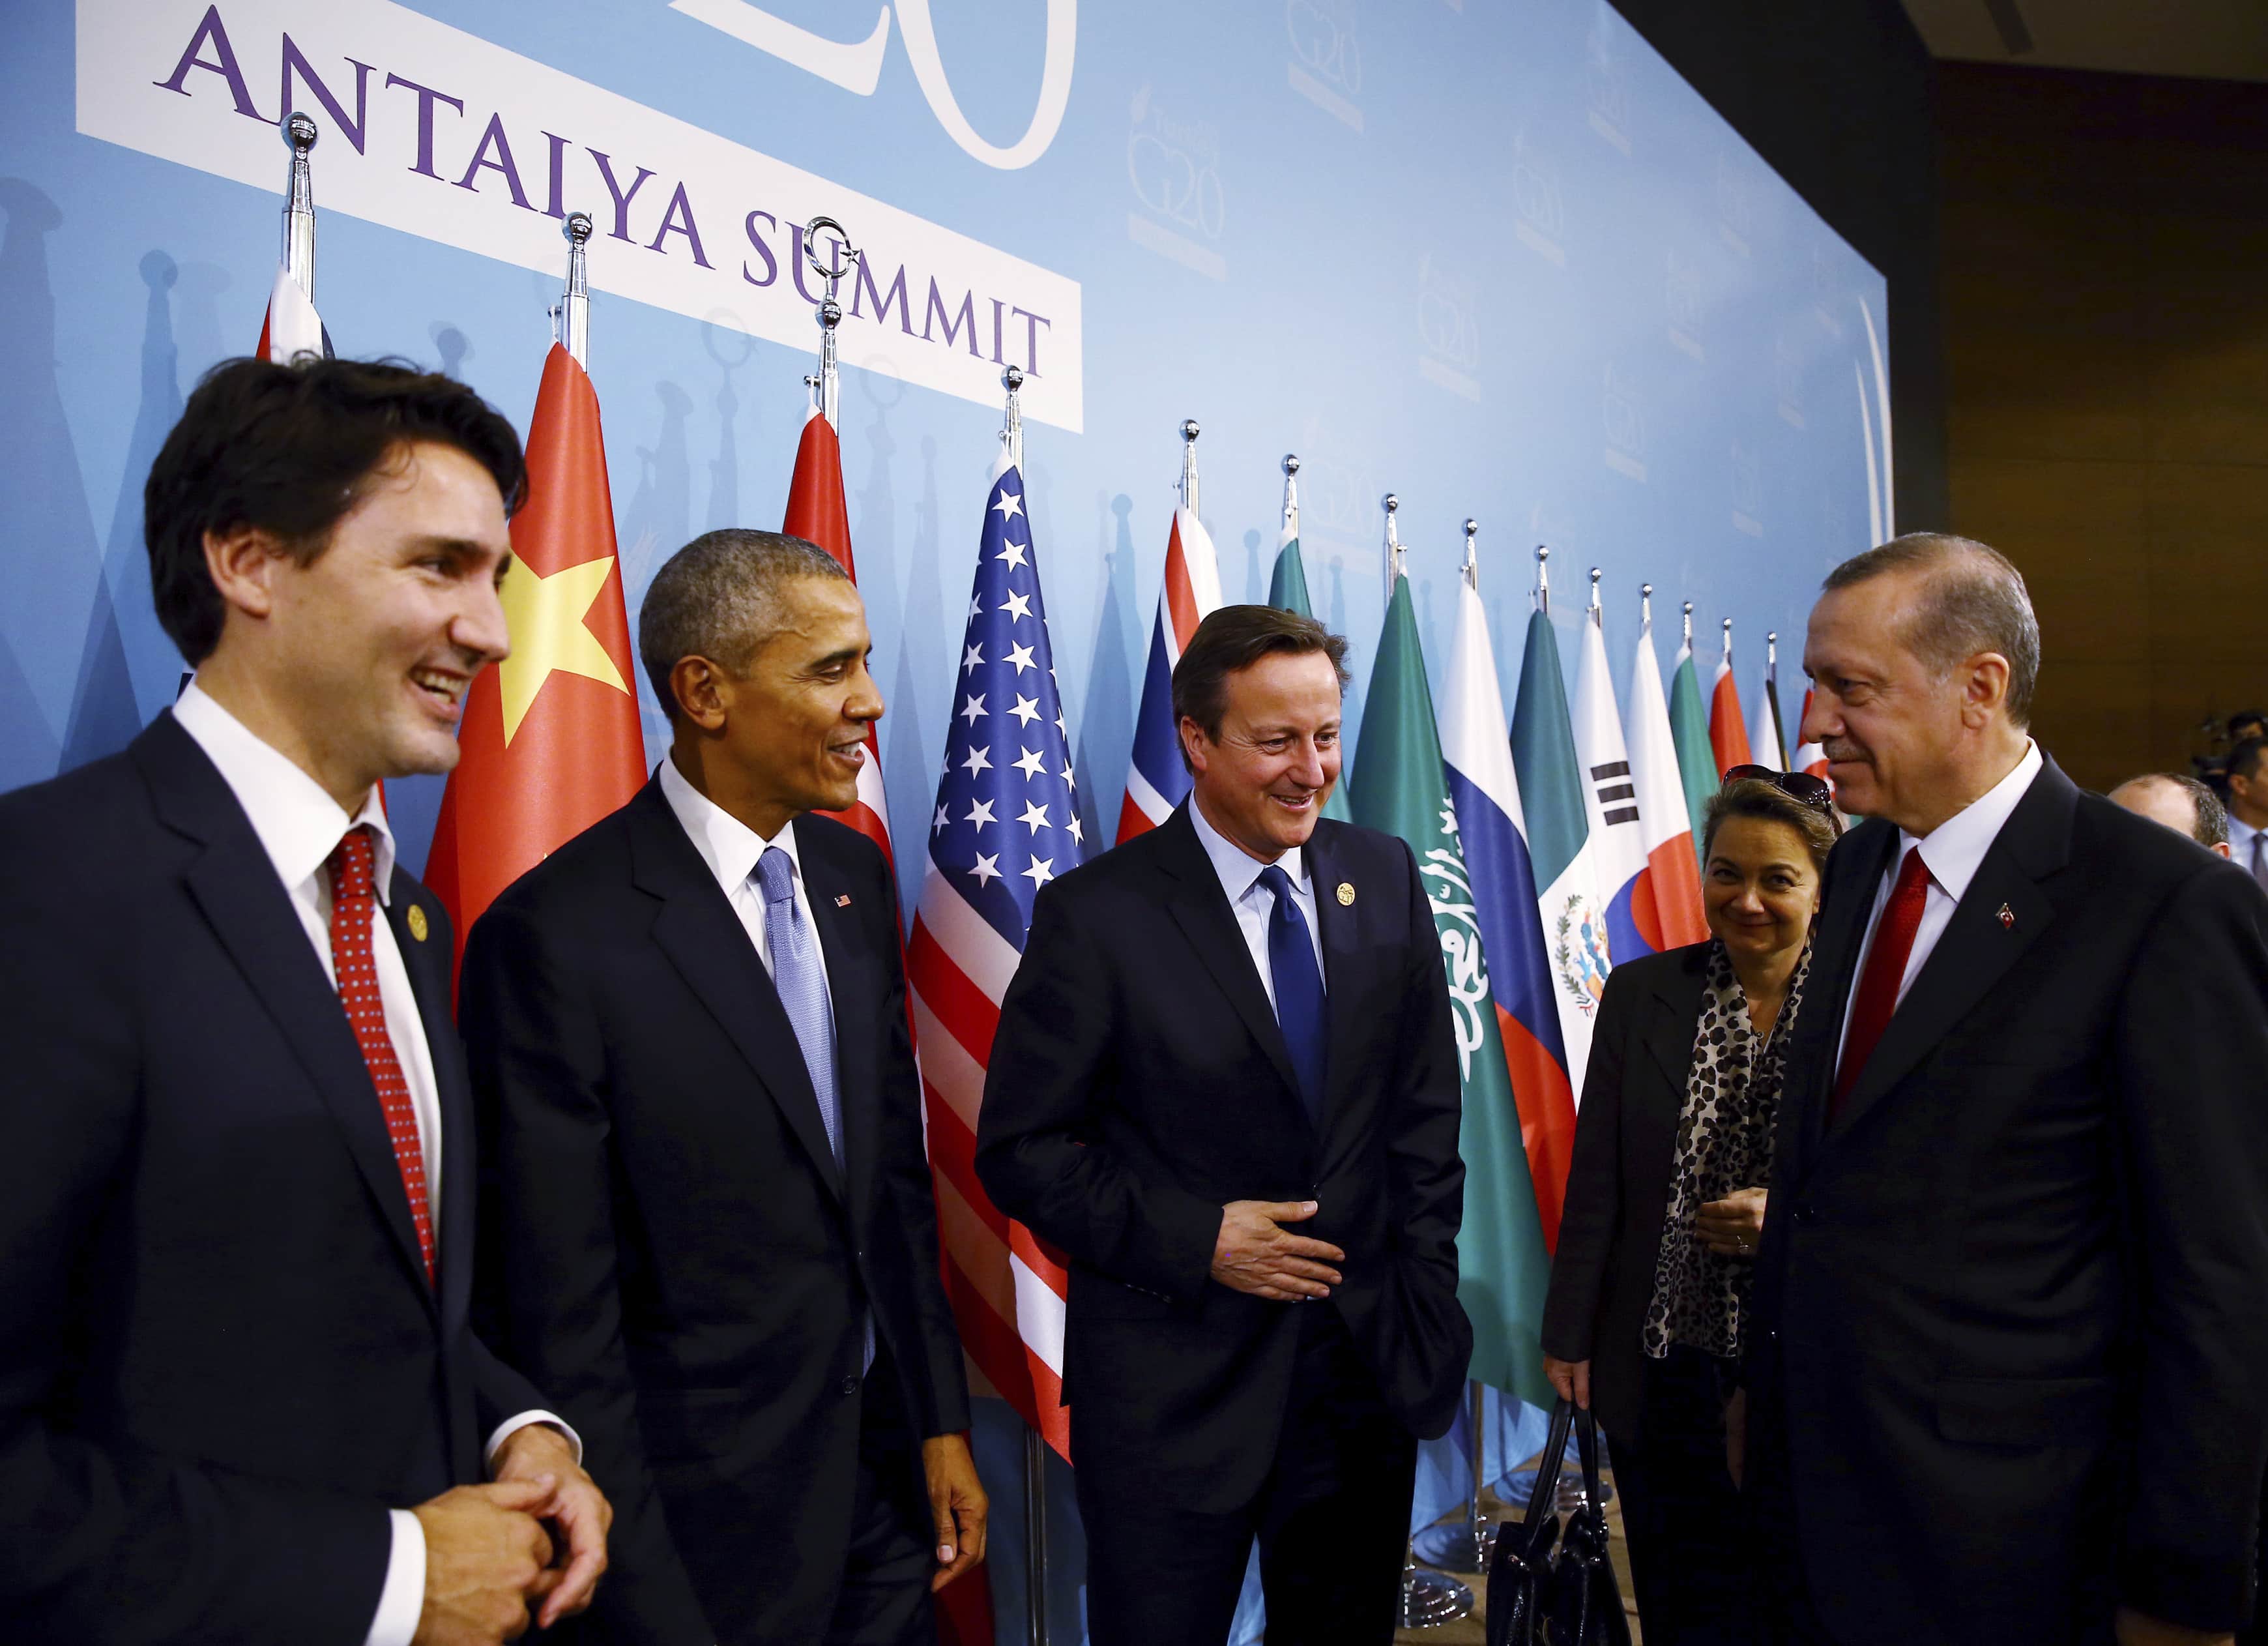 Turkish President Recep Tayyip Erdogan talks with Canada's Prime Minister Justin Trudeau, U.S. President Barack Obama and British Prime Minister David Cameron at the G20 summit in Antalya, November 15, 2015, Andalou Agency / AP